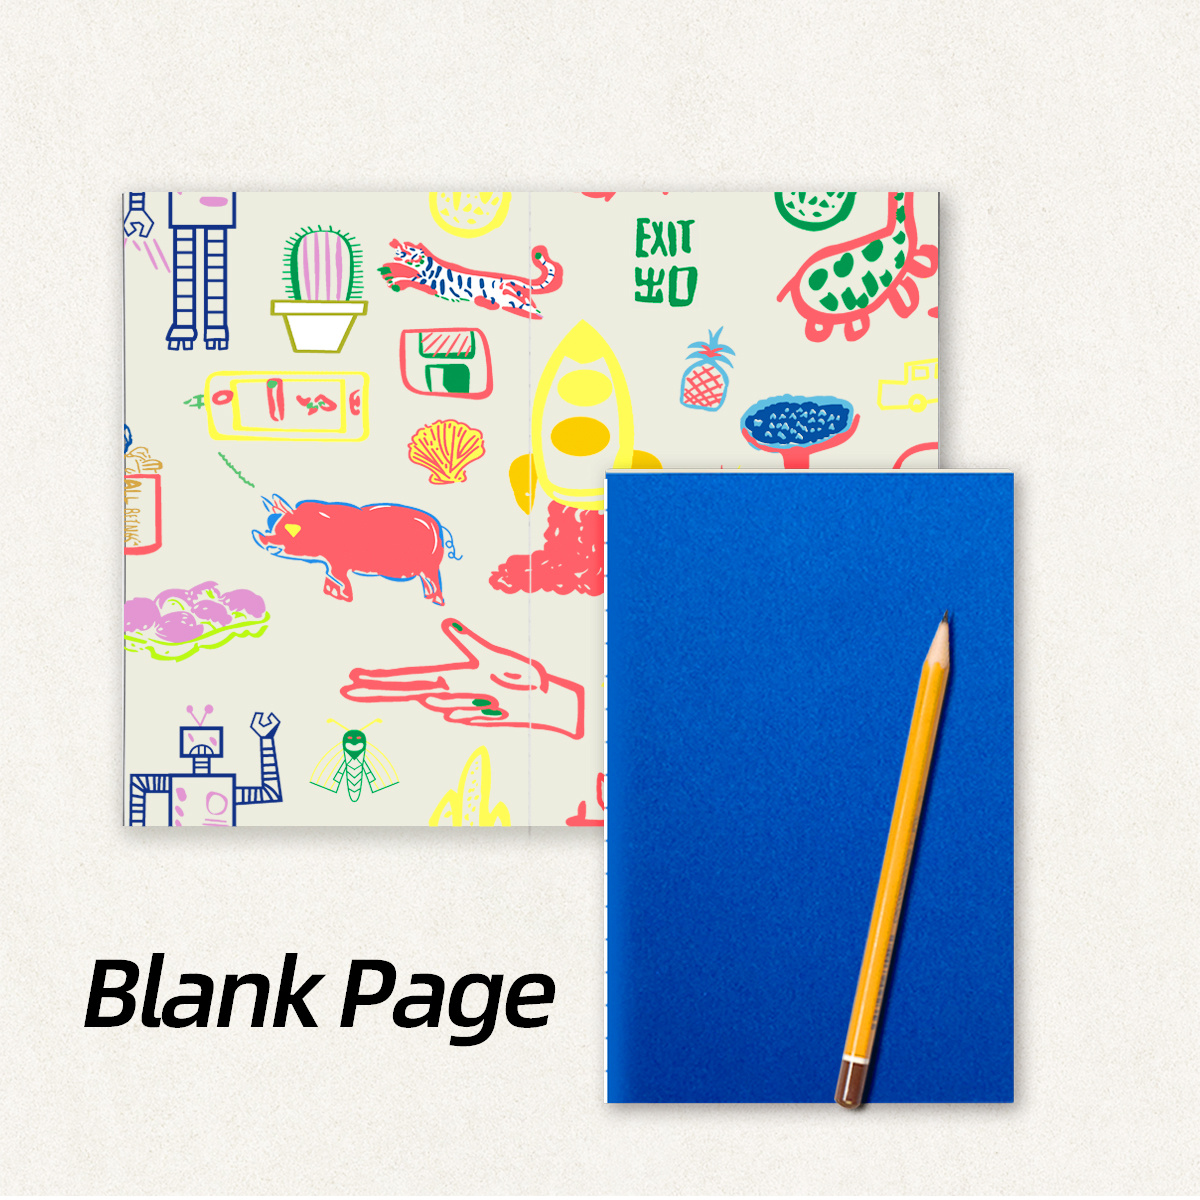 Plain White Blank Book 8W x 6H Hardcover 28 Pages 14 Sheets